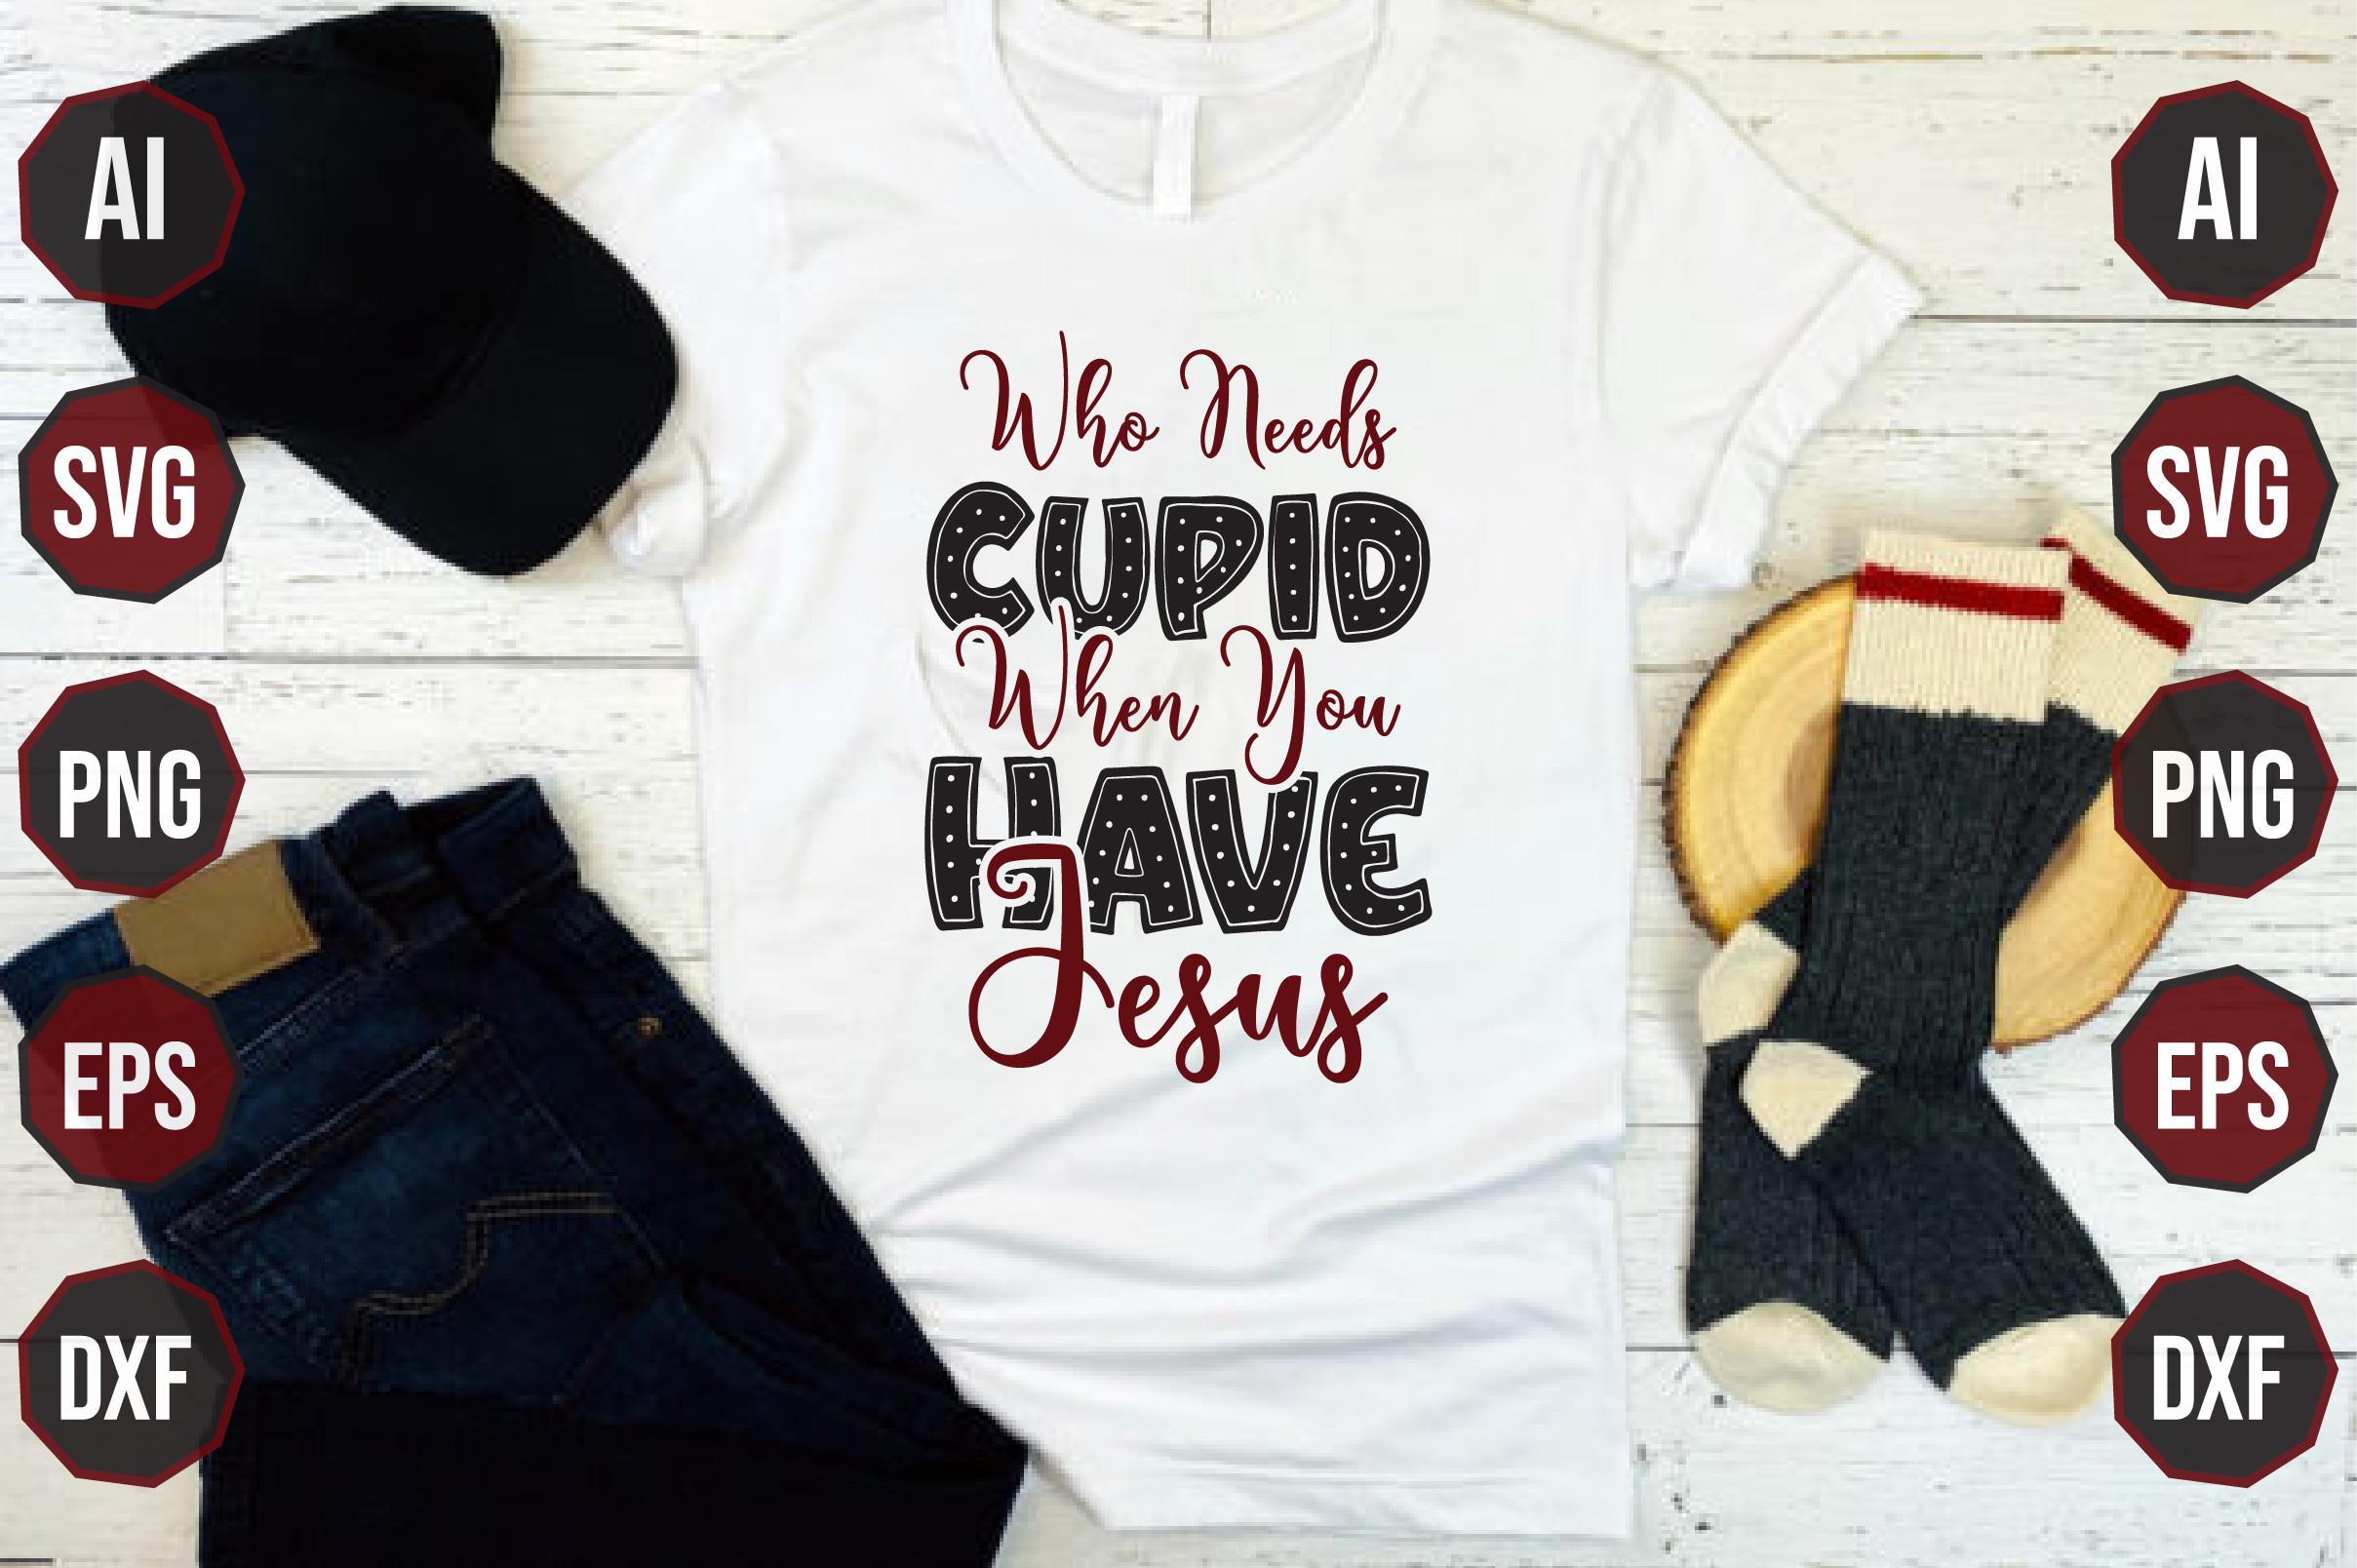 Who Needs Cupid when You Have Jesus